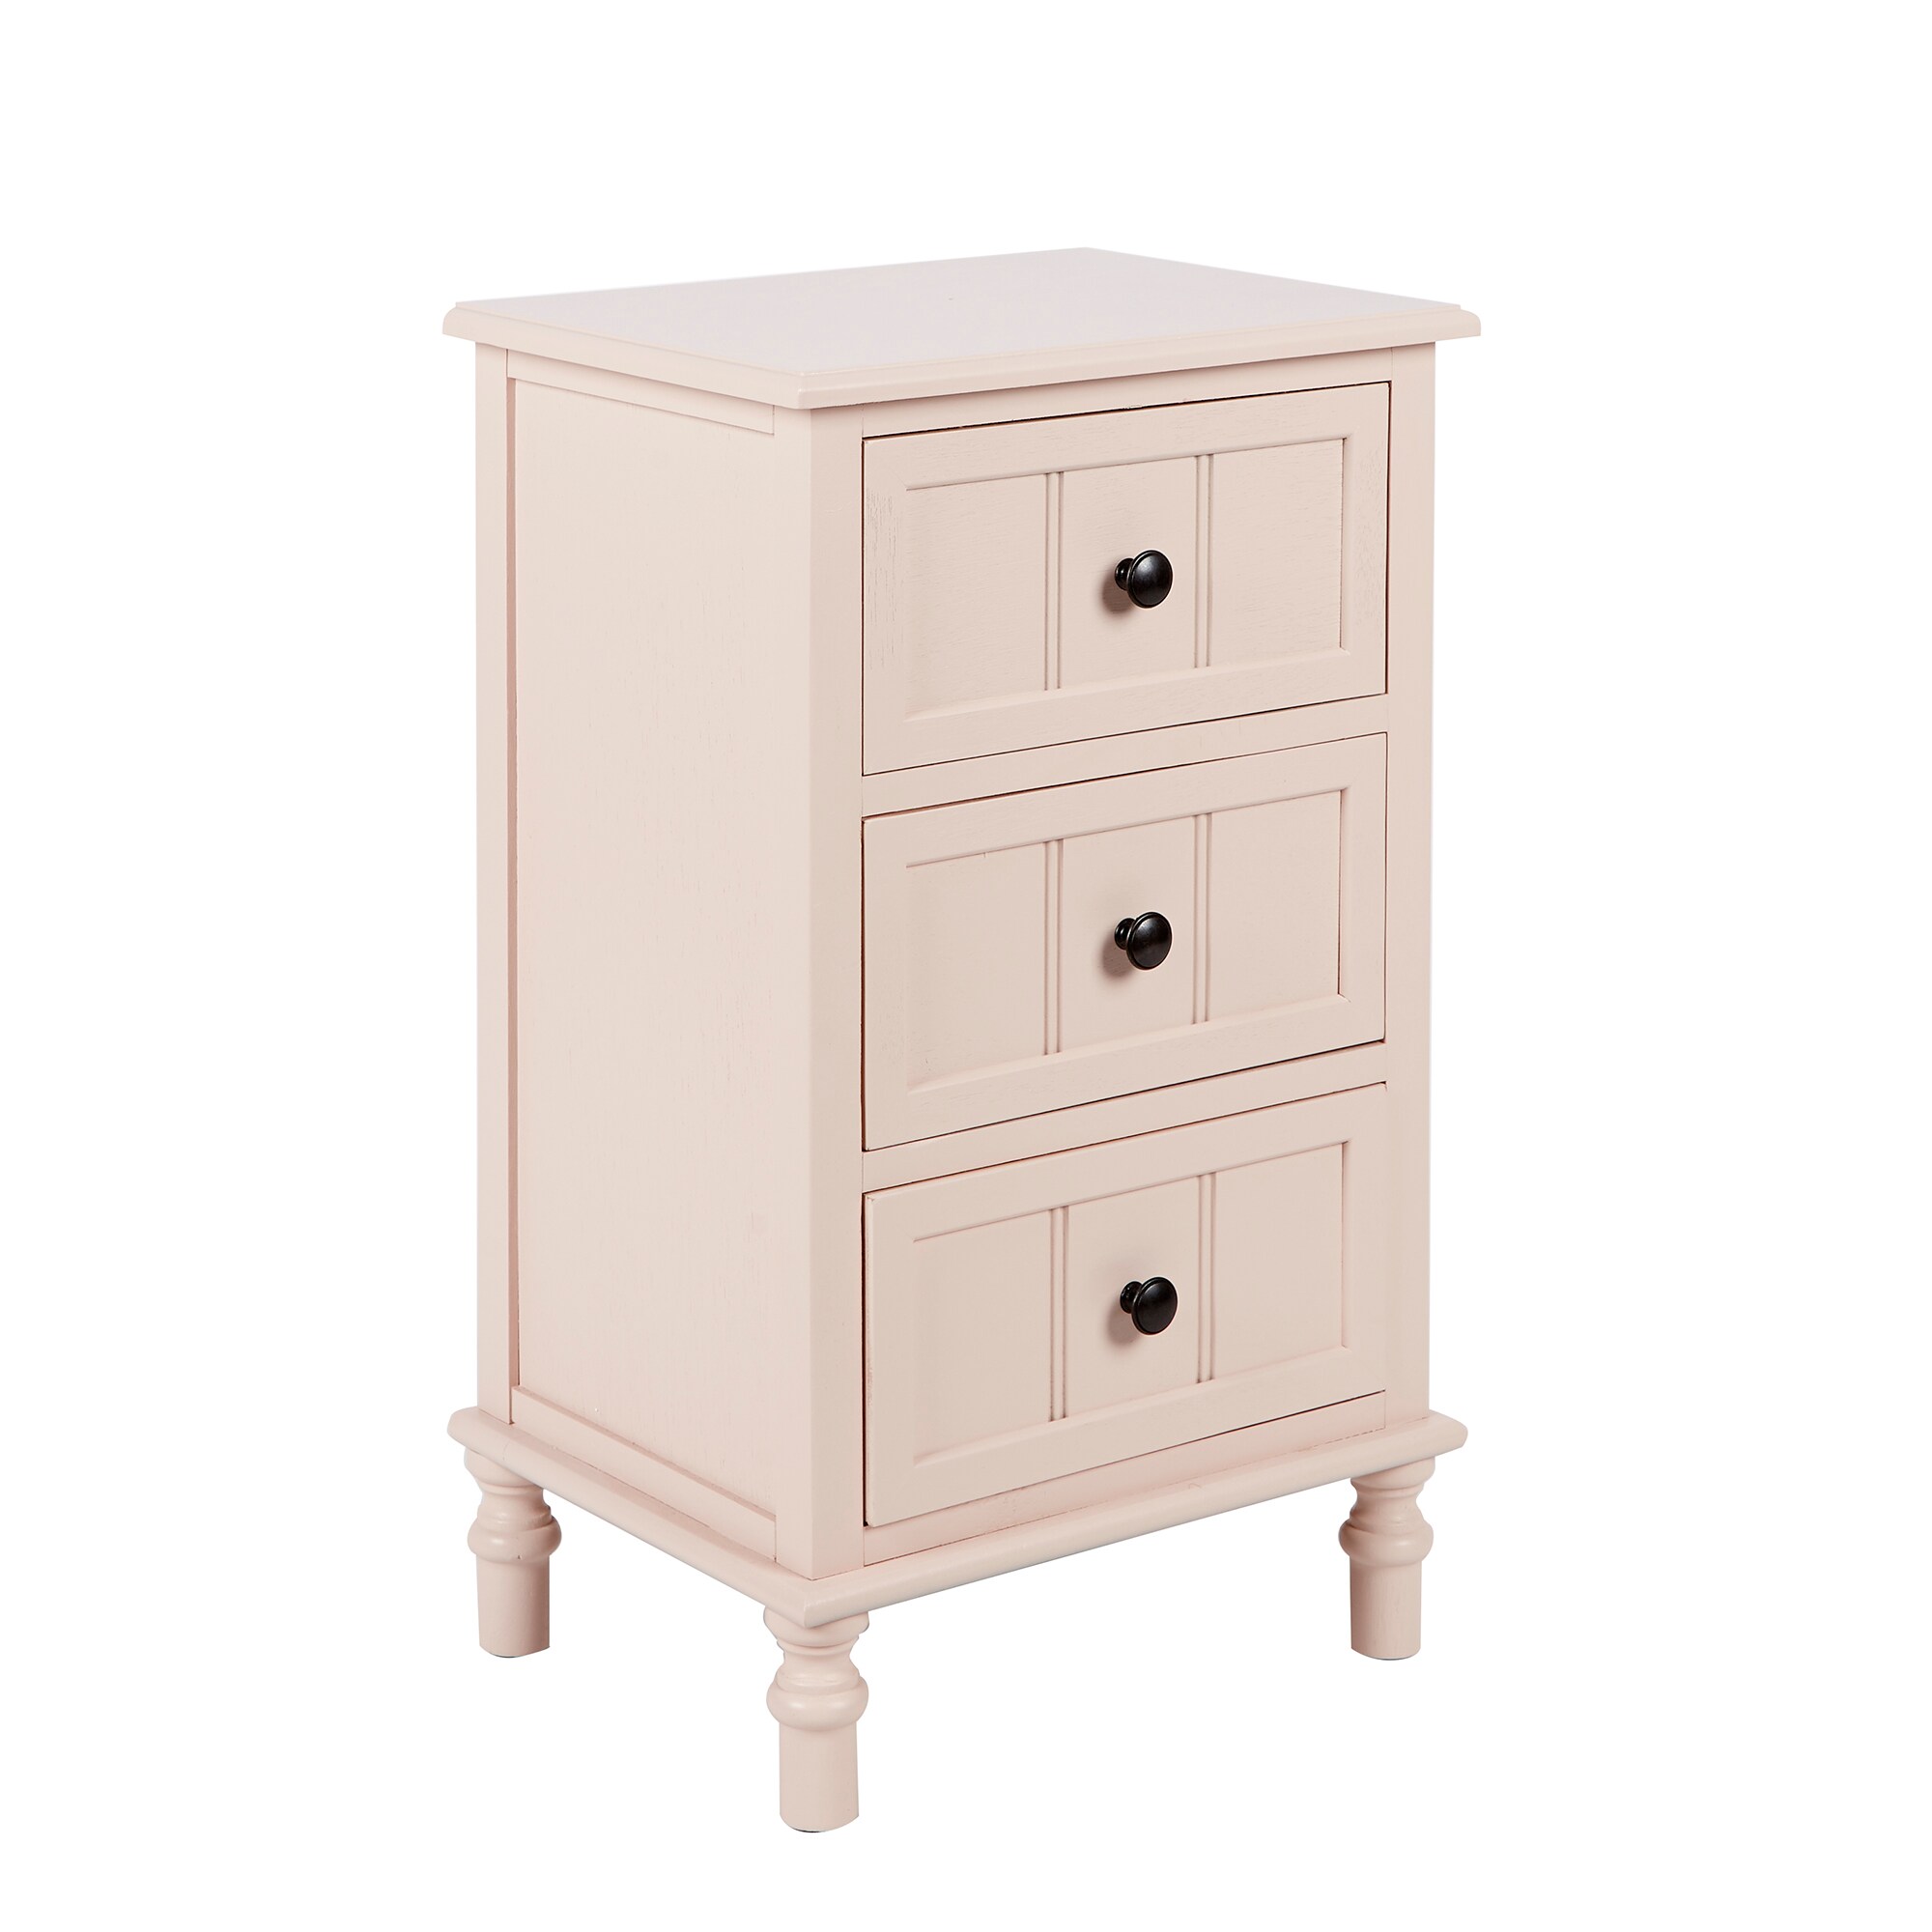 Decor Therapy Simplify 15.75-in W x 25-in H Rosie Mae Wood End Table ...